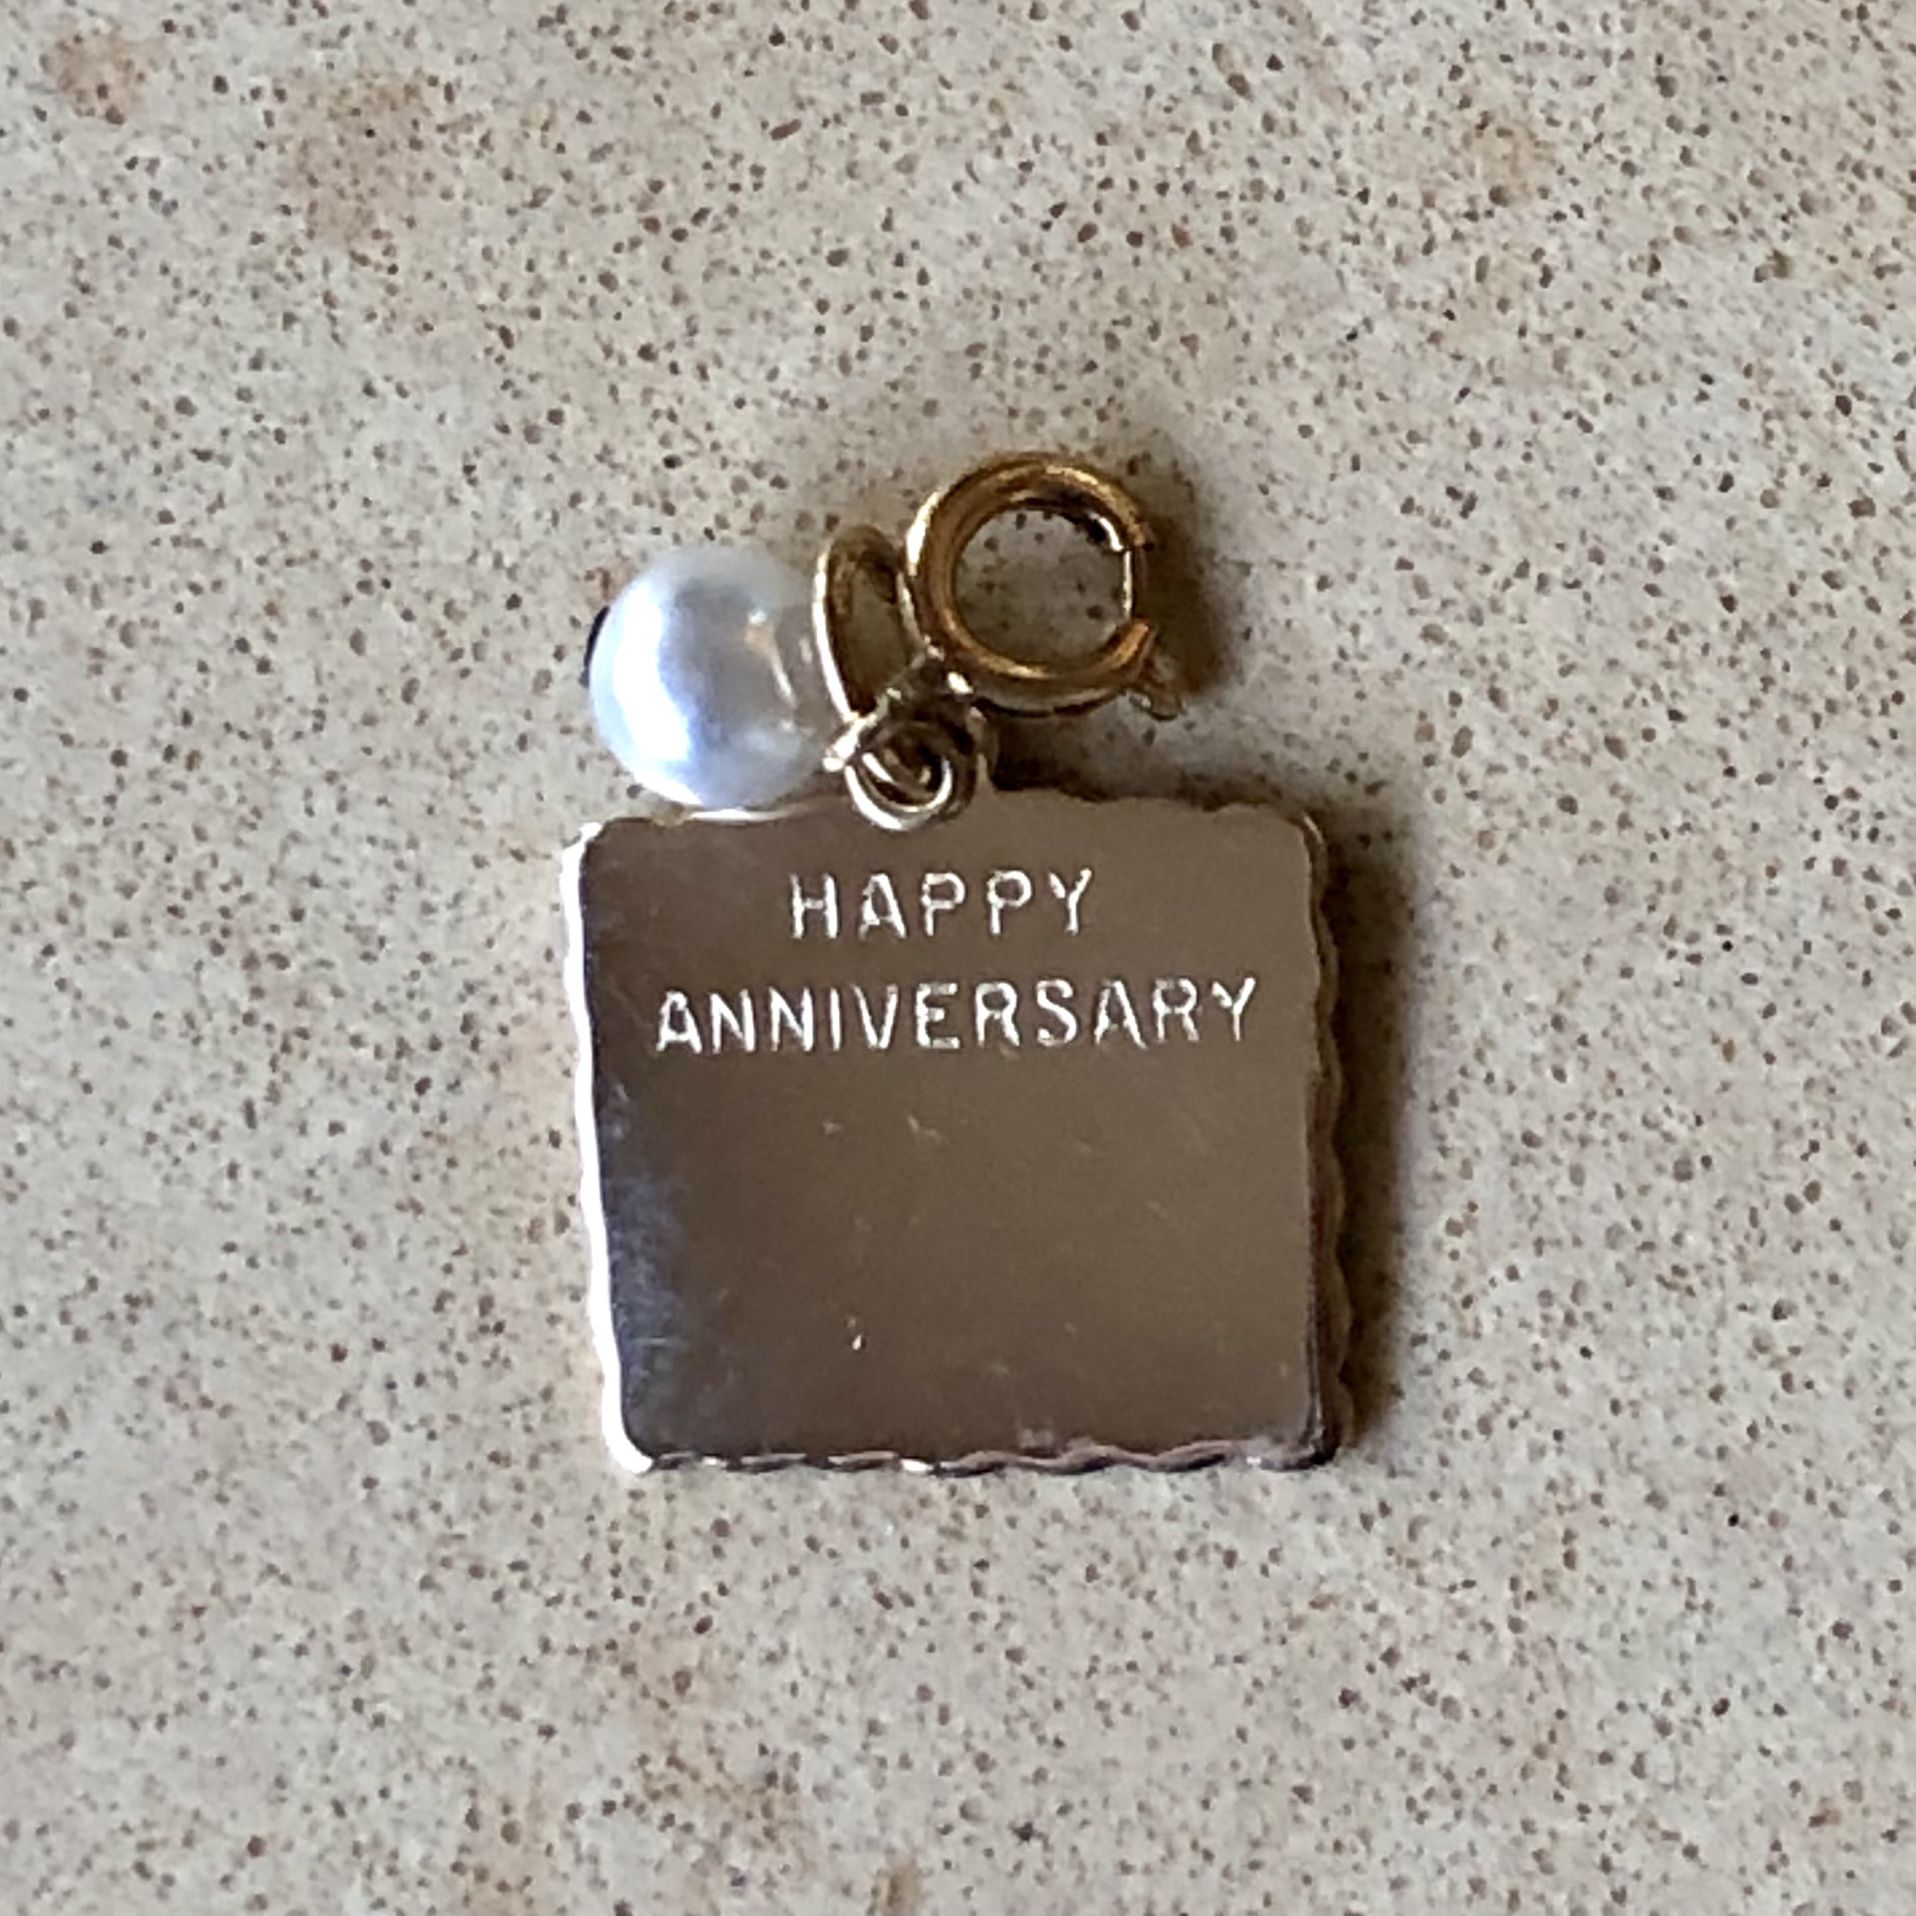 ✴️ Pretty, unused, vintage, gold tone Happy Anniversary square charm with faux pearl & lobster clasp